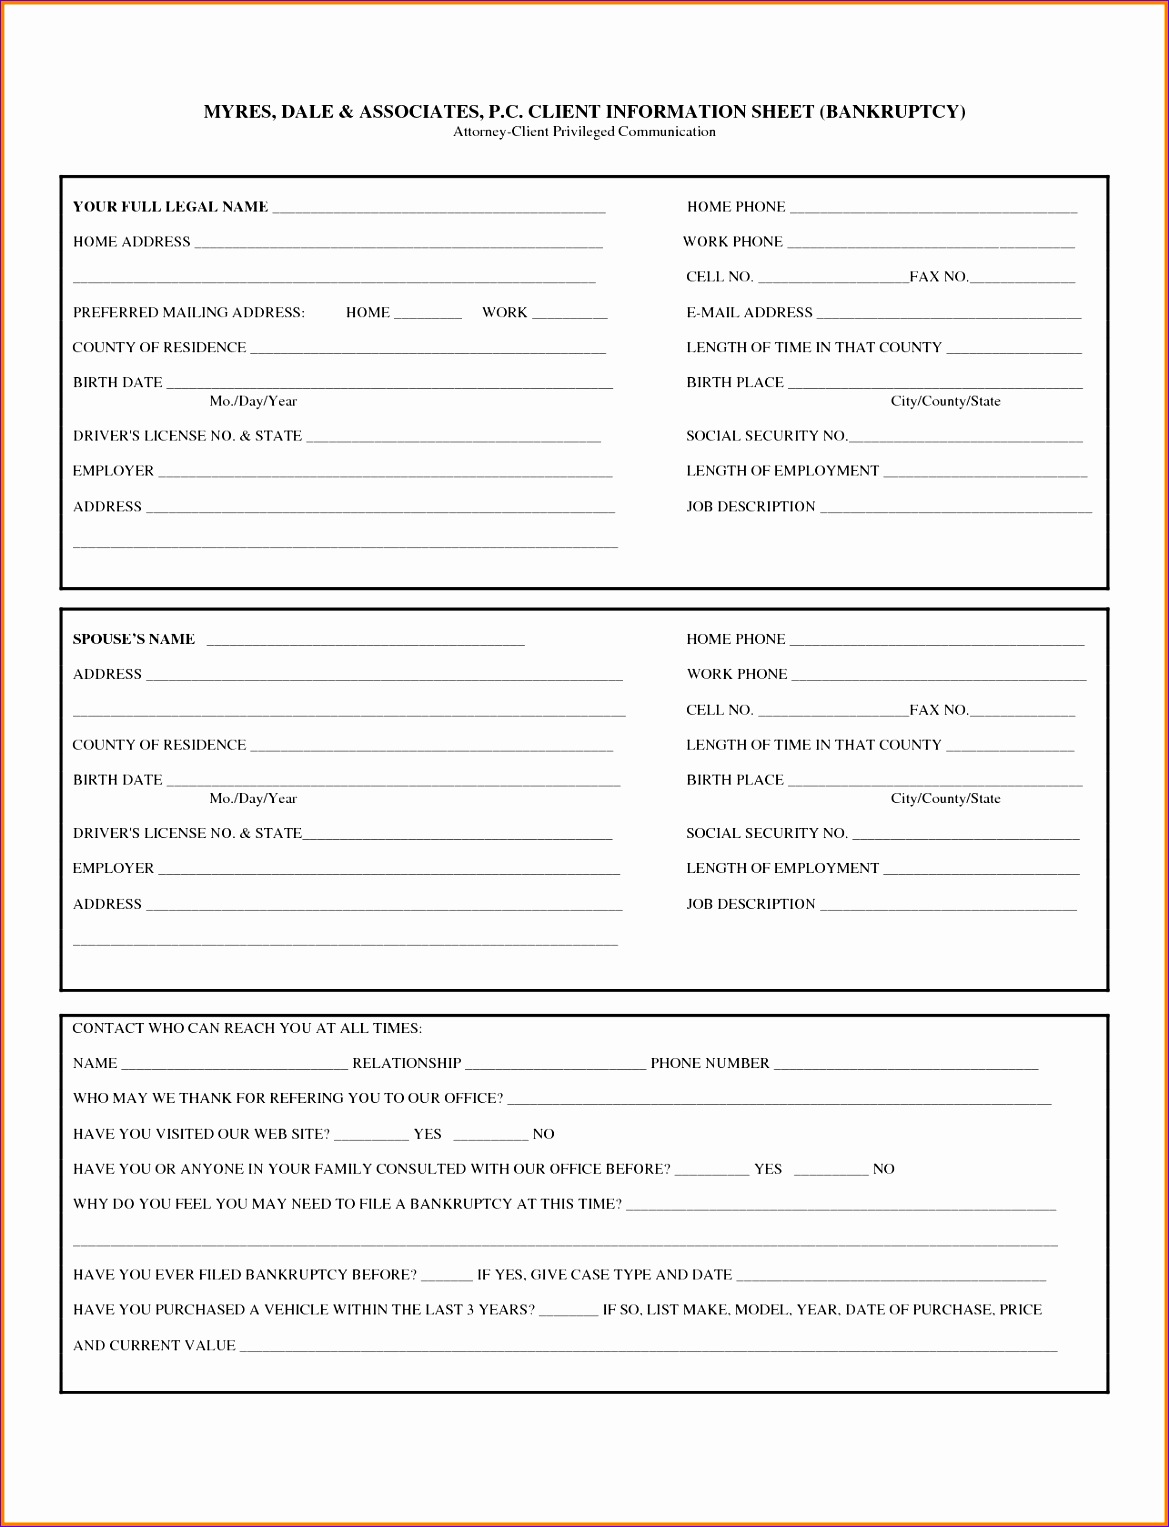 client information sheet png 11691527